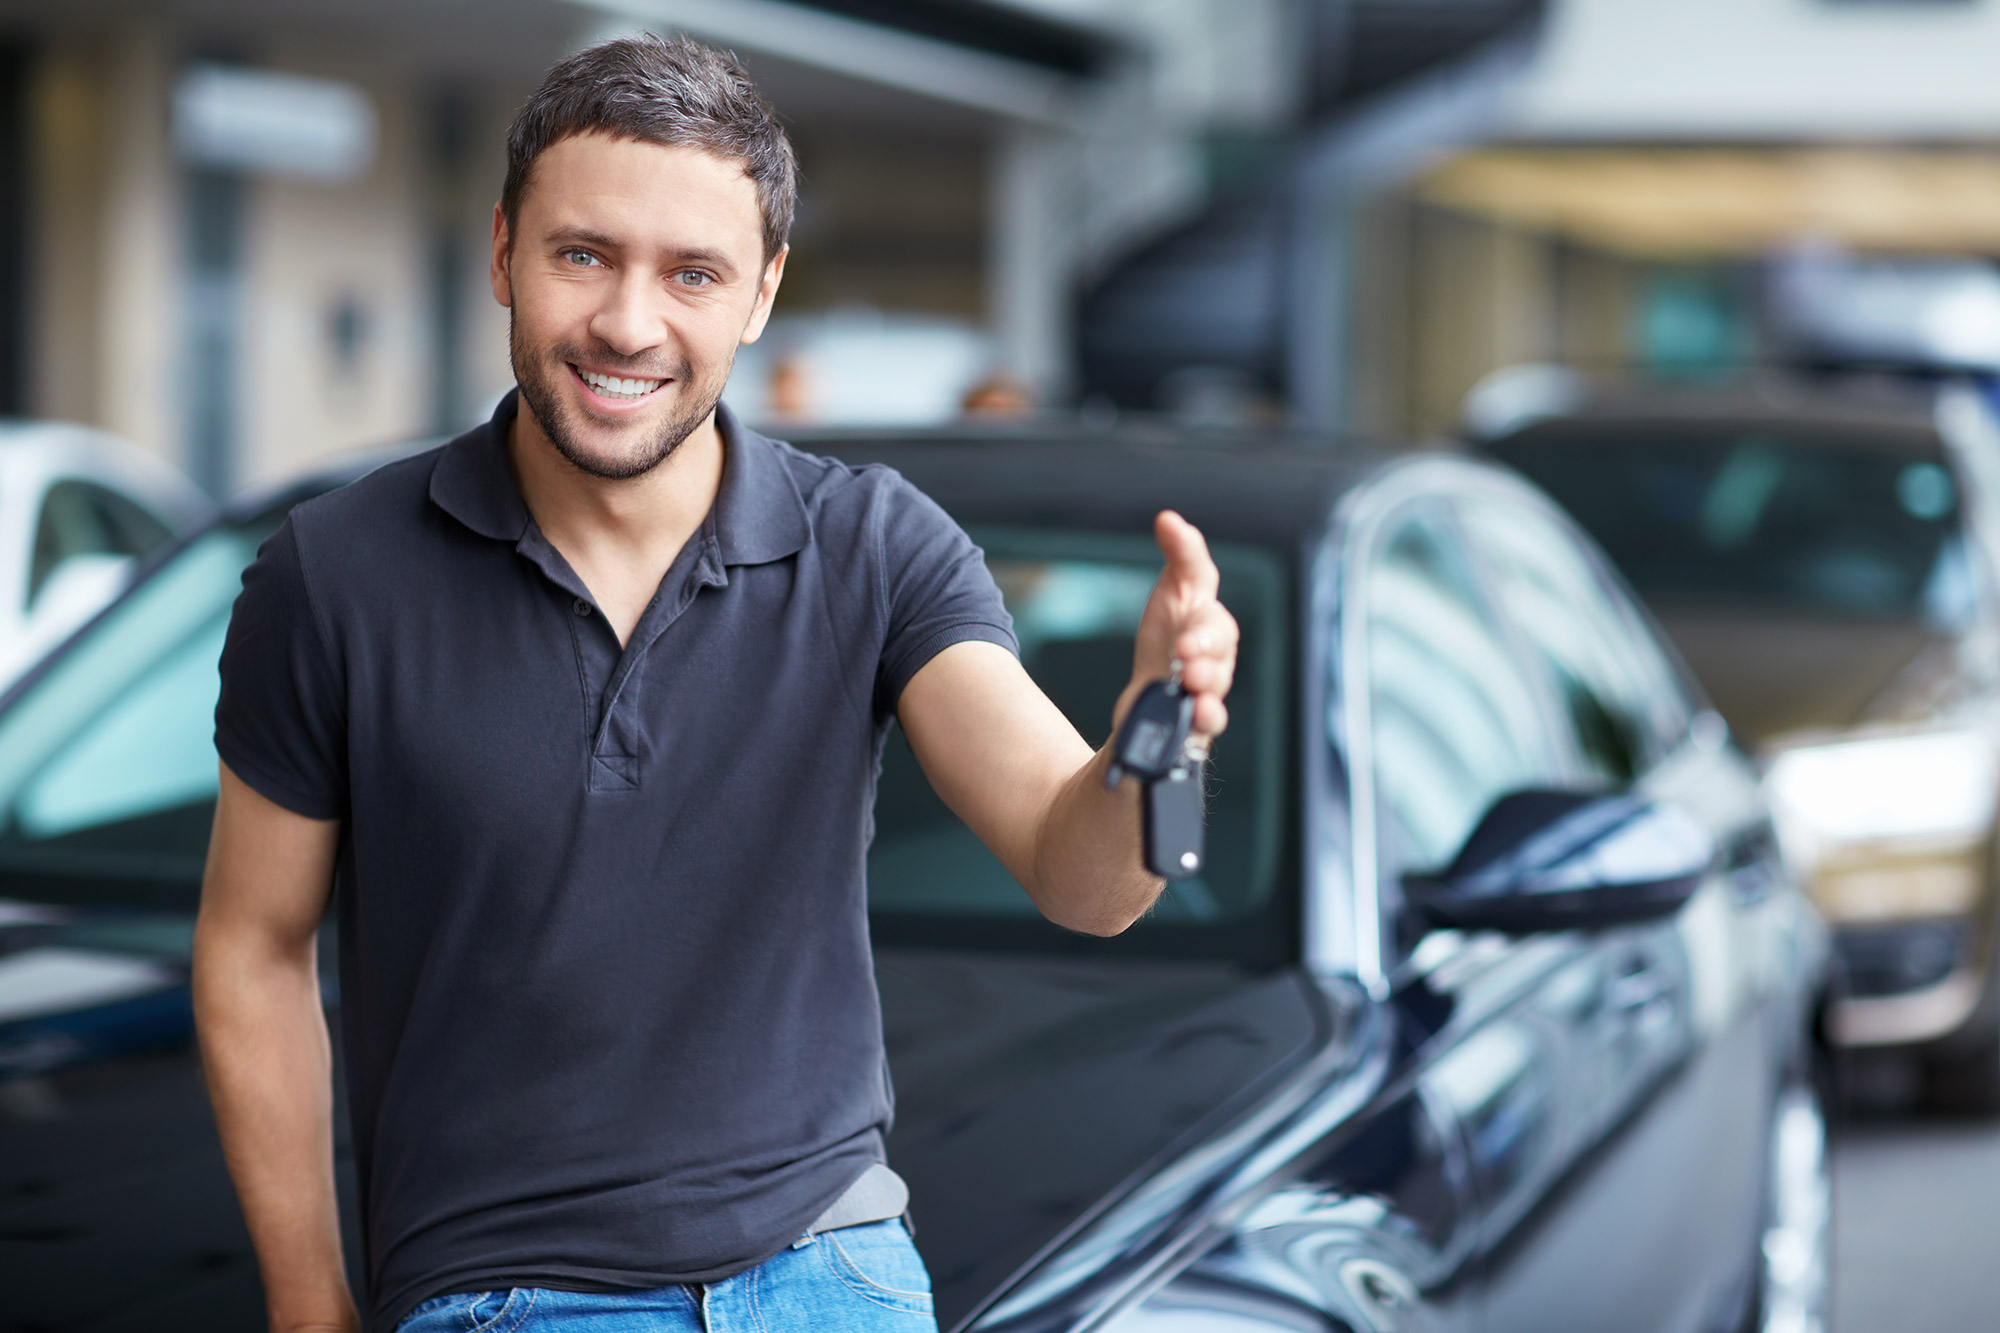 6 Facts You Might Not Know About Leasing A Car